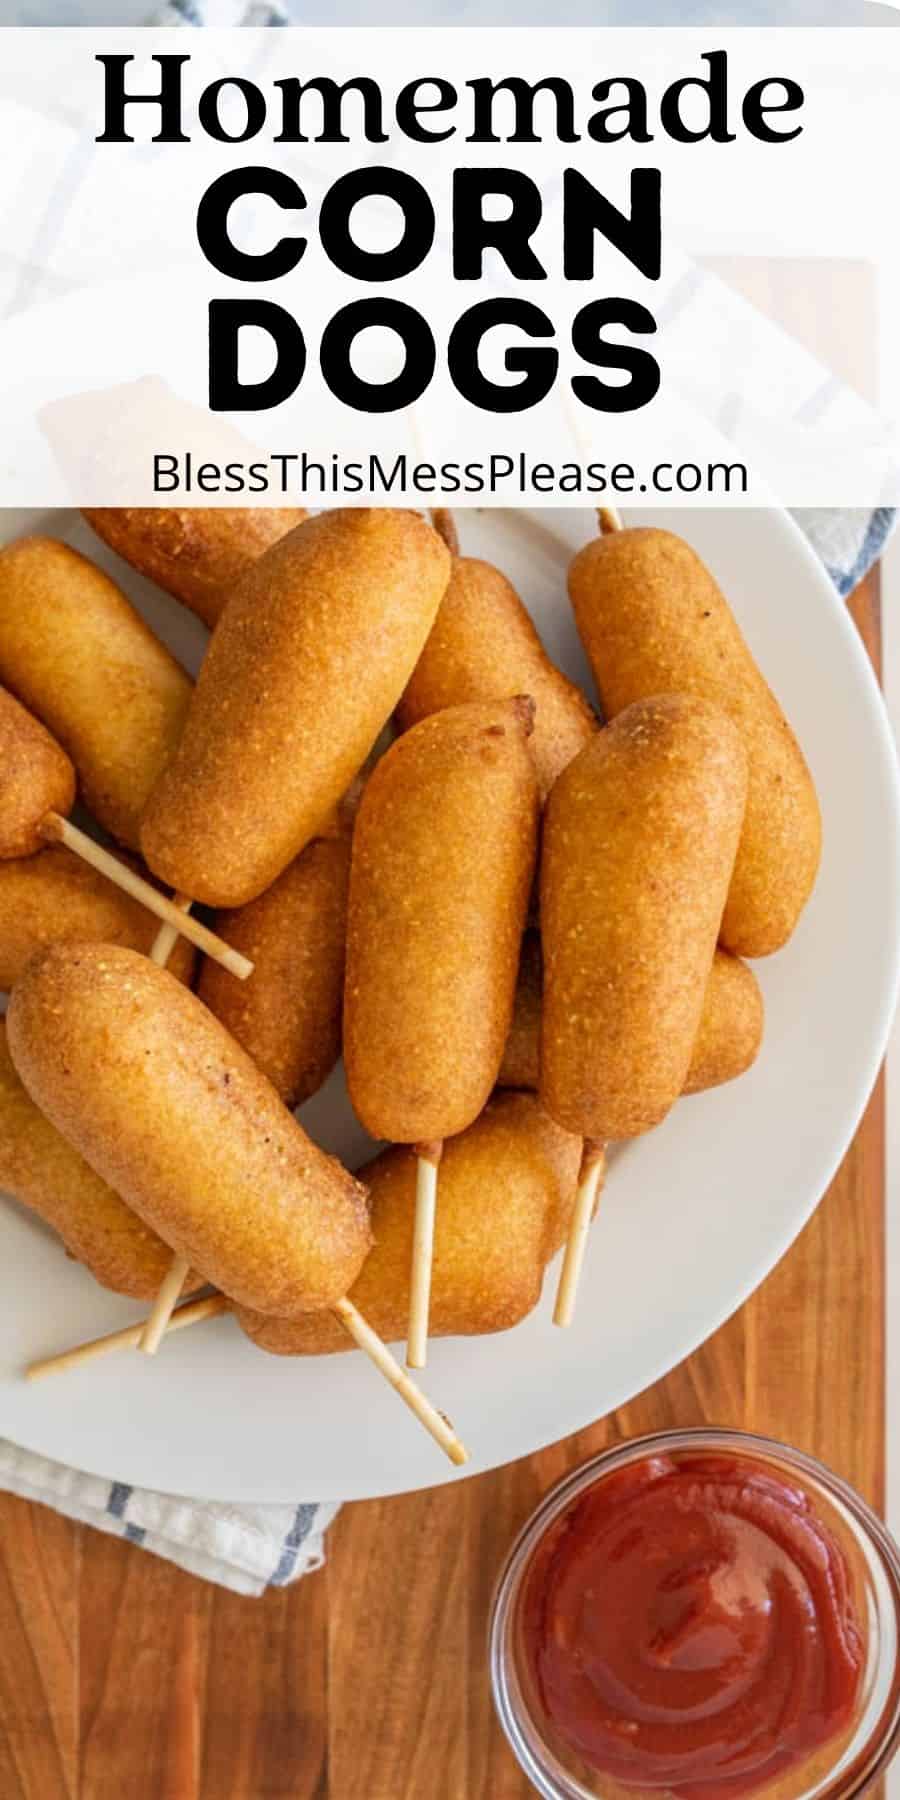 top view of a plate of corn dogs with a bowl of ketchup next to it and the words "homemade corn dogs" written at the top.